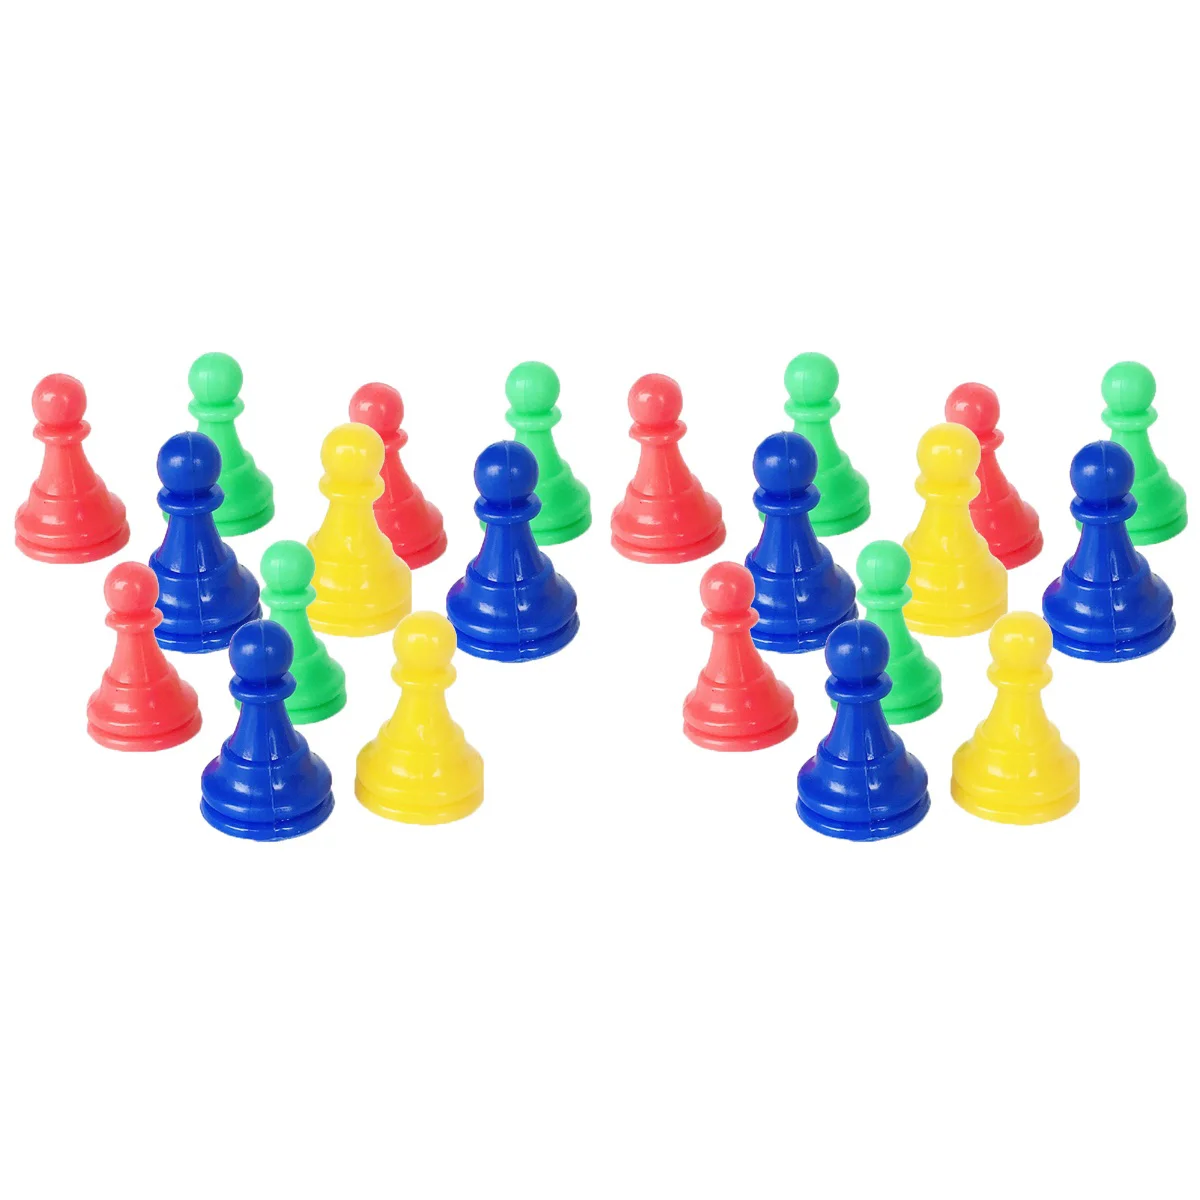 

Game Board Pieces Chess Checkers Accessorieschecker Replacement Pawn Color Mixedludo Sorry Parcheesi New Pegs Year Party